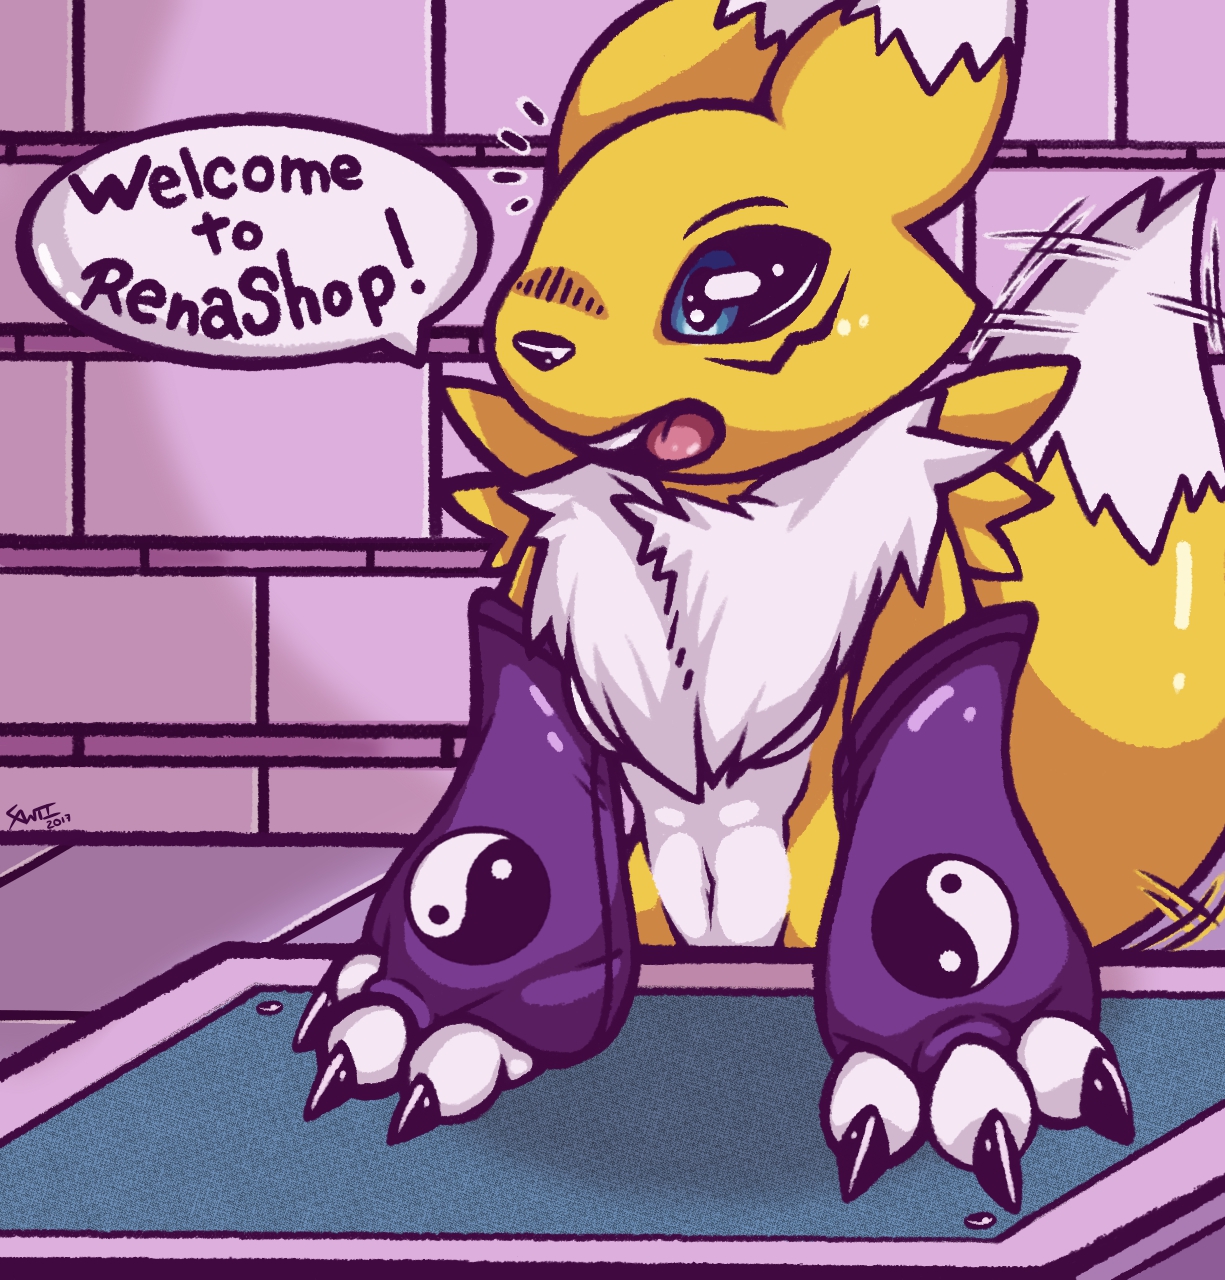 Its a pic of renamon that i thought was cute.